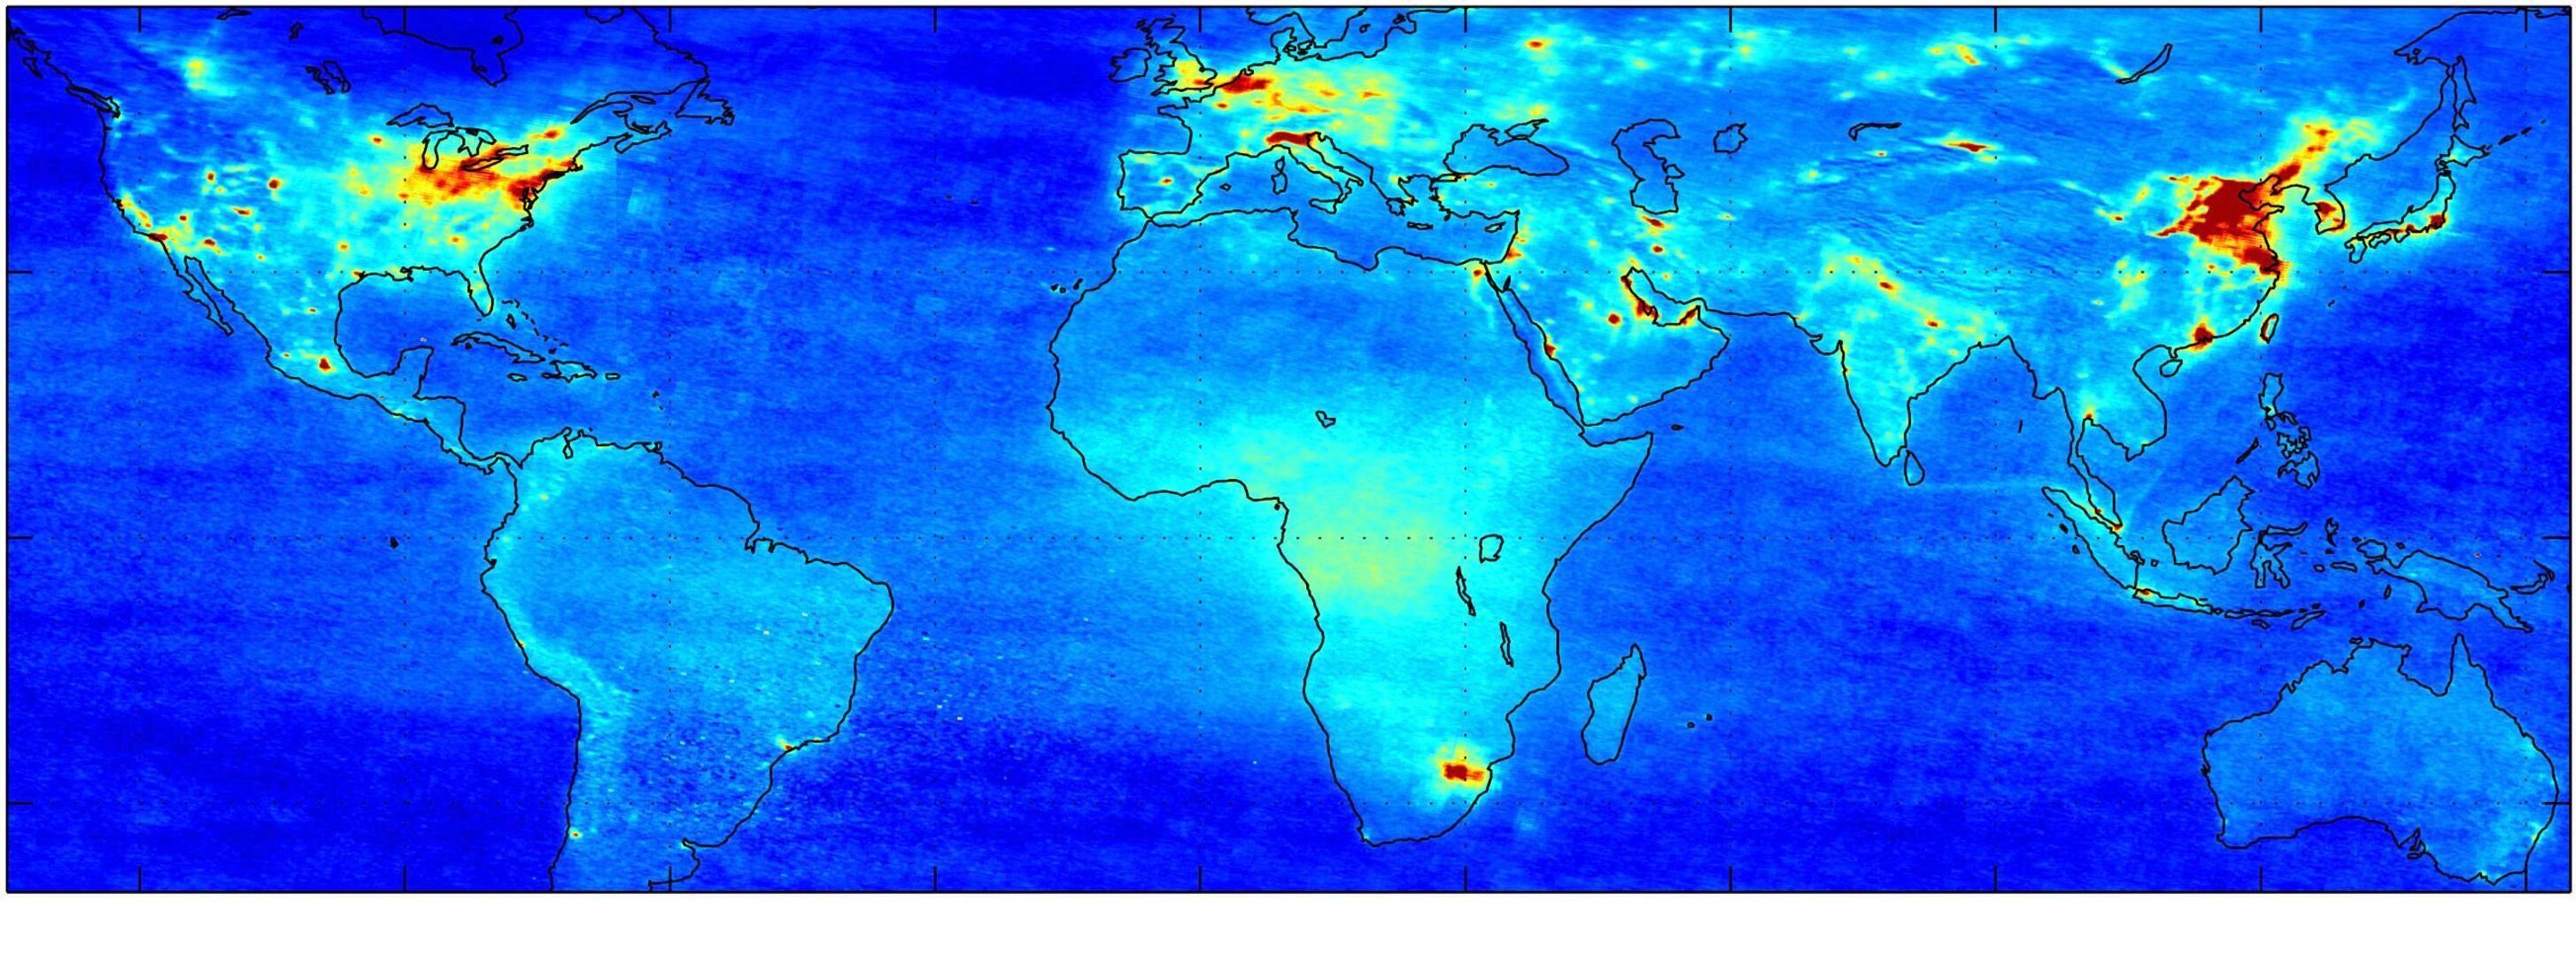 Global air pollution map produced by Envisat's SCIAMACHY